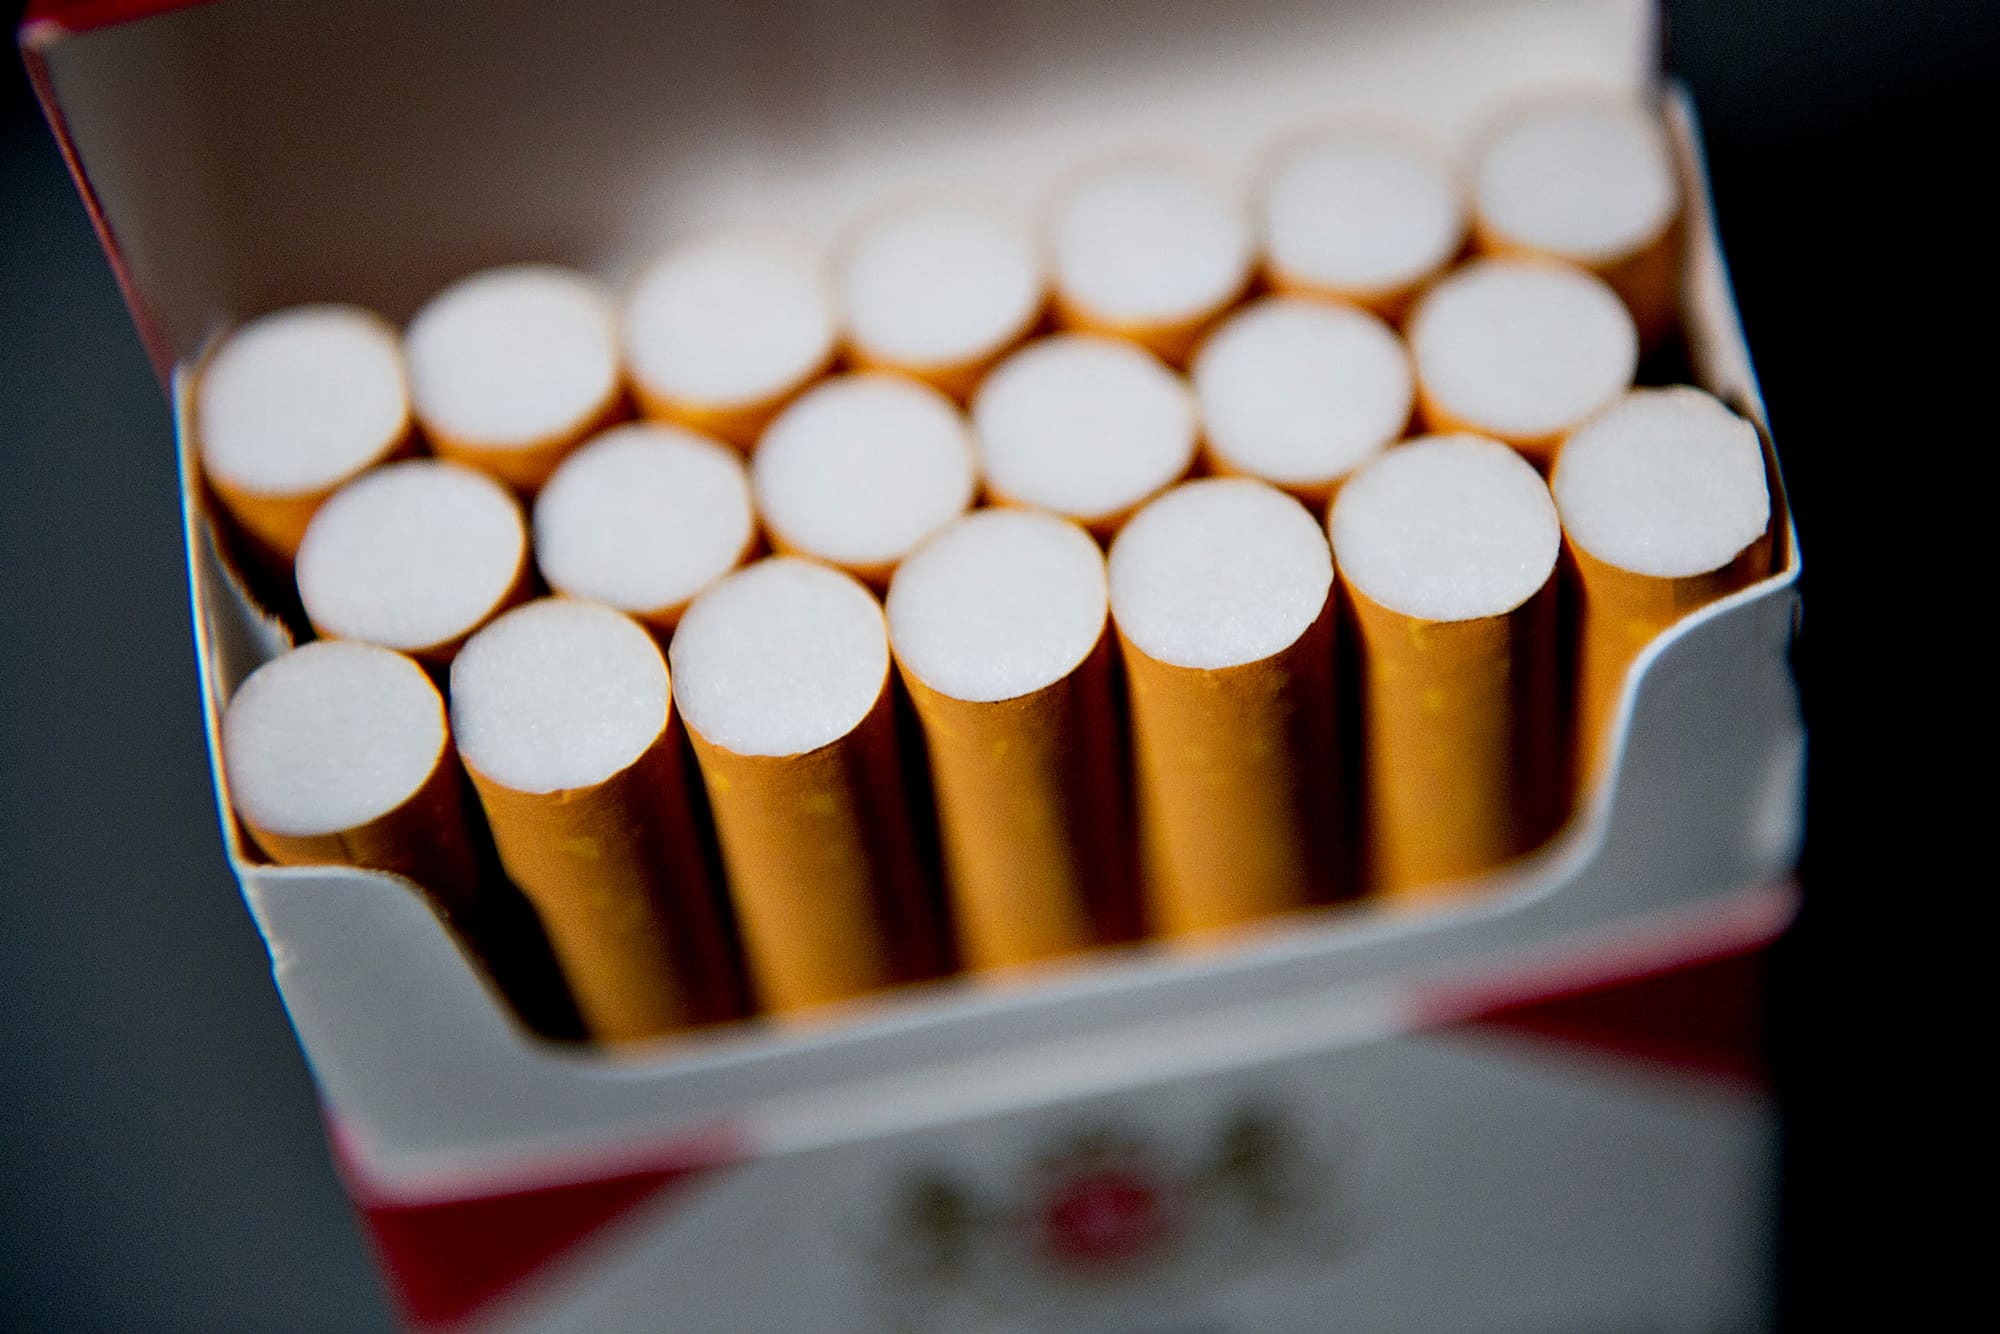 Altria said transport of cigarettes flattened by 2020